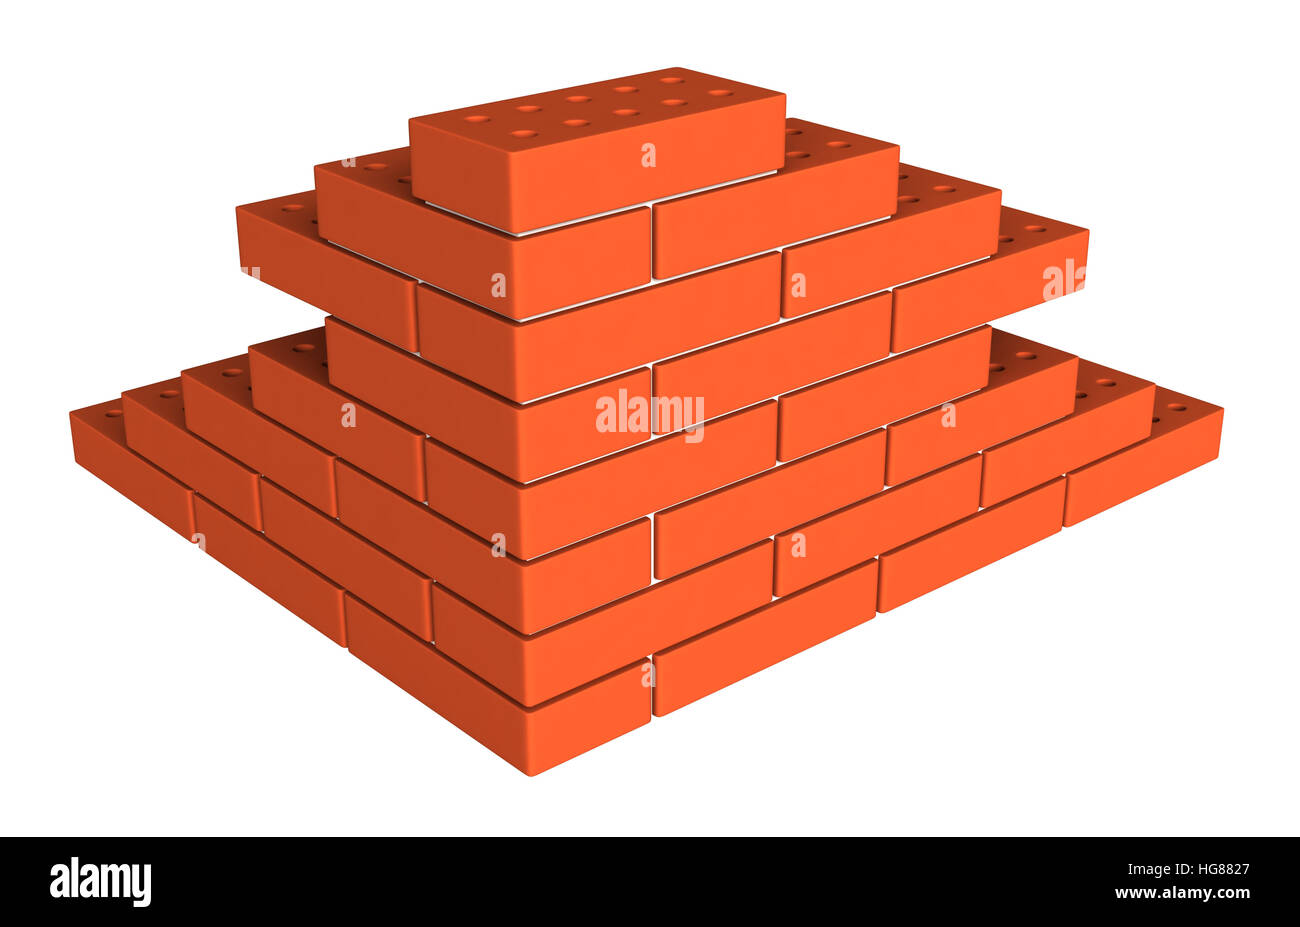 Engineering brick Cut Out Stock Images & Pictures - Alamy